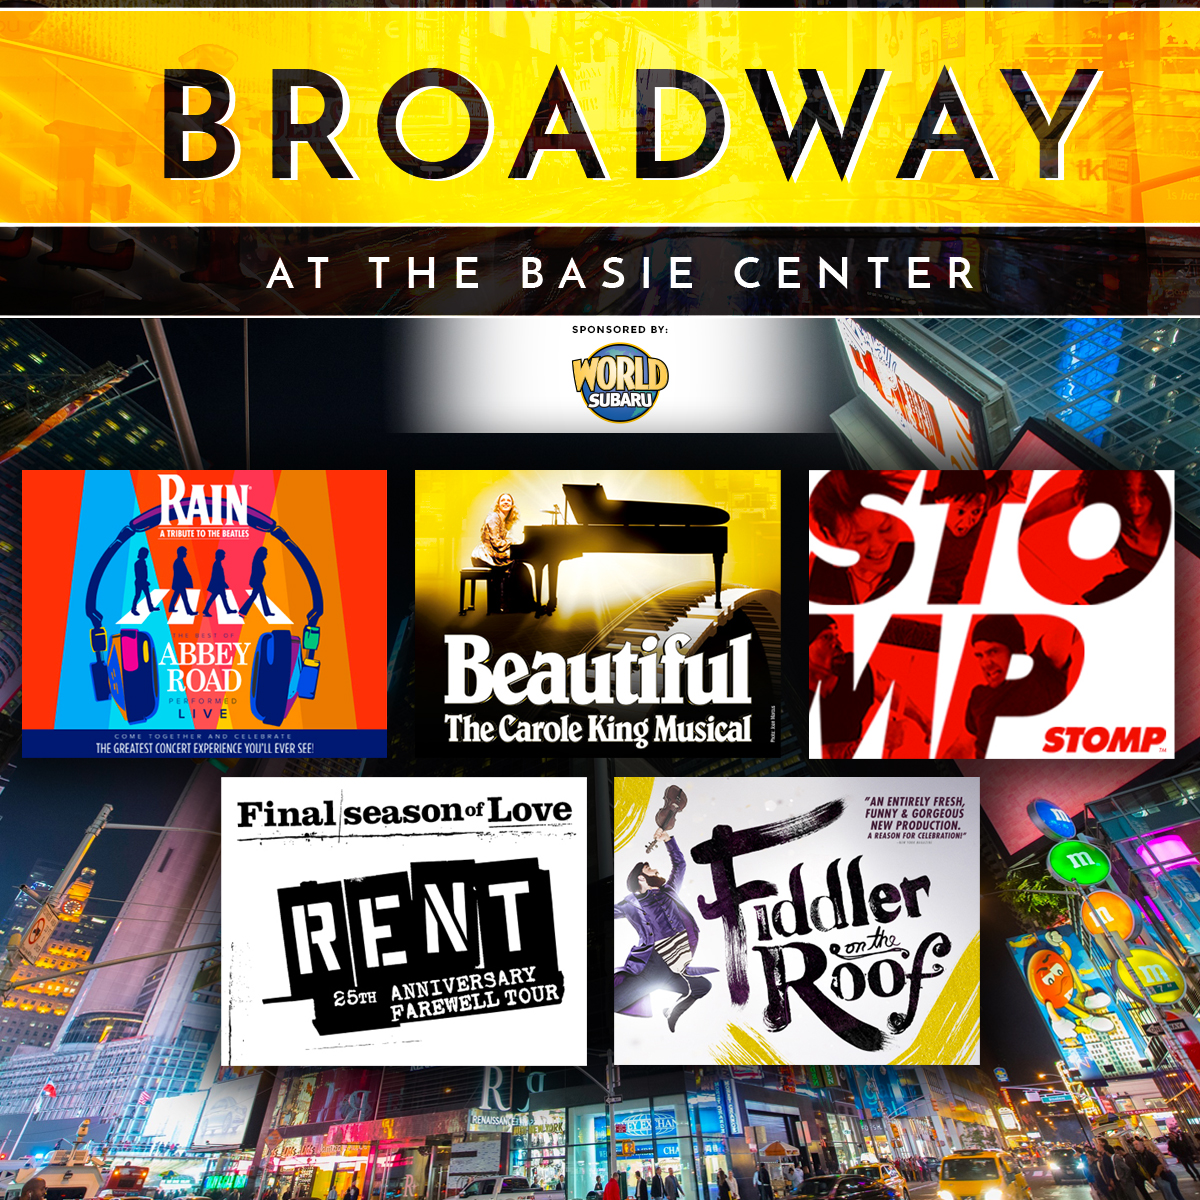 Broadway at the Basie Center